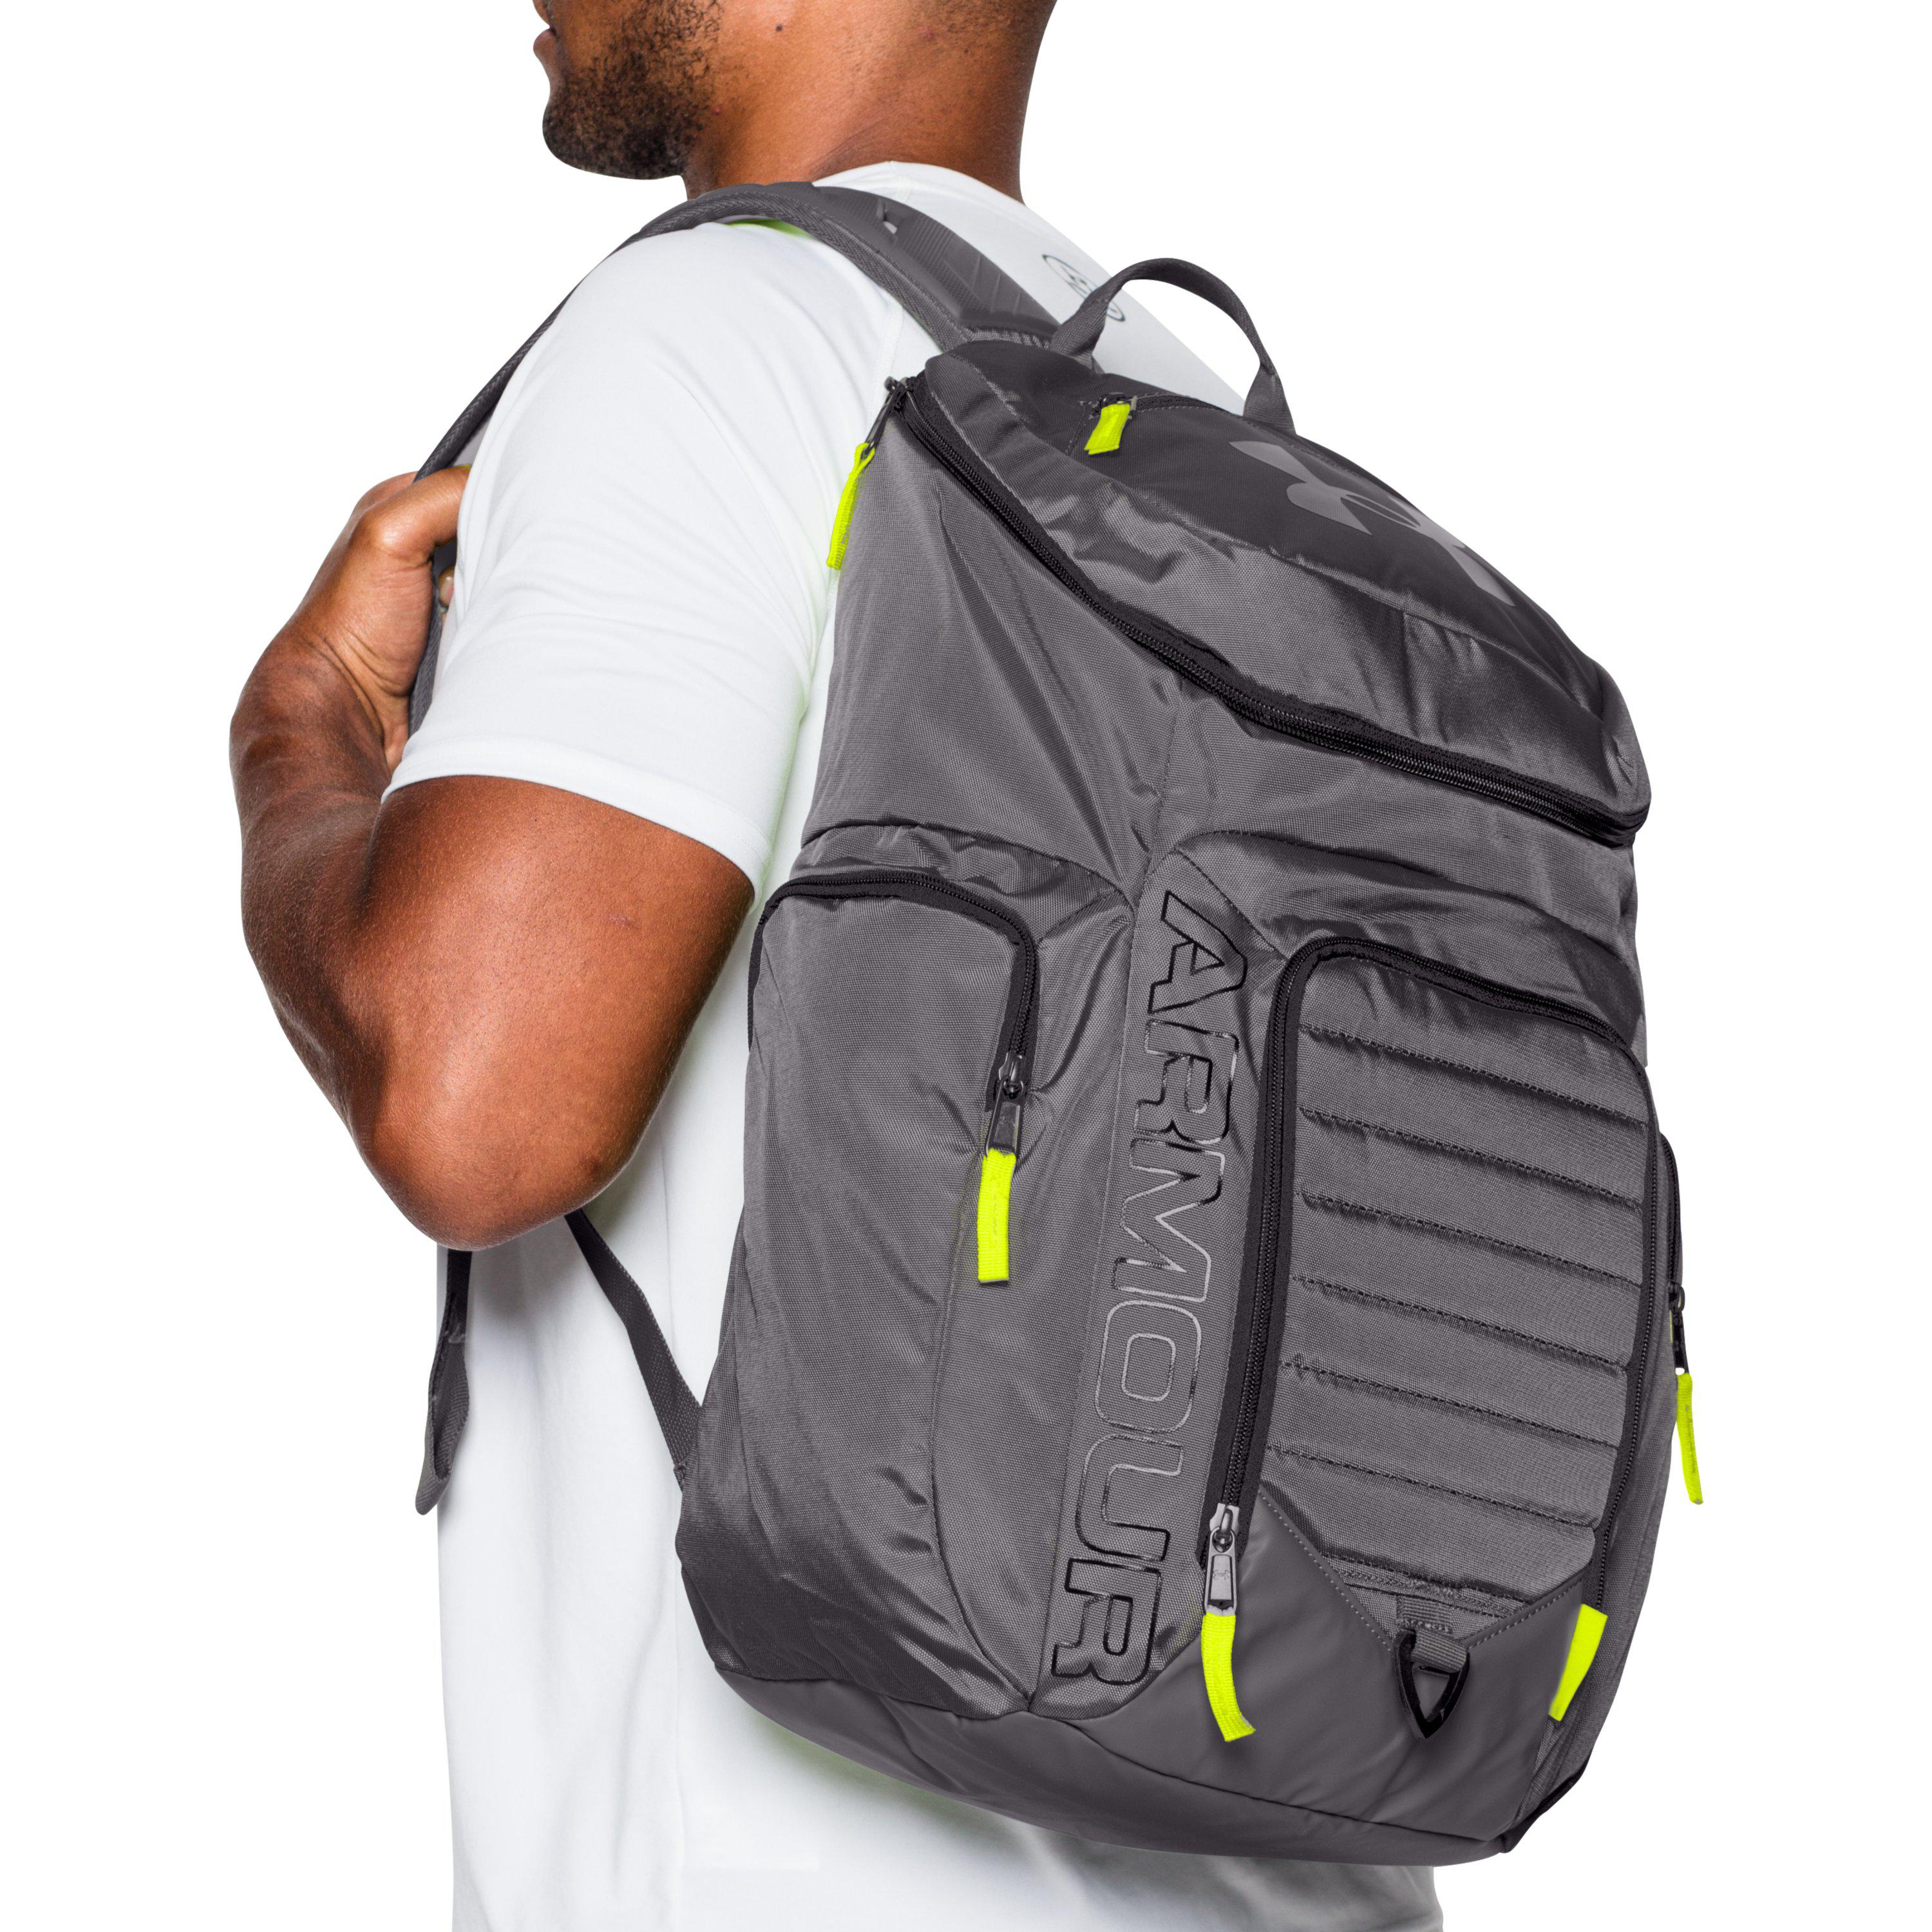 Under Armour Ua Storm Undeniable Ii Backpack for Men - Lyst